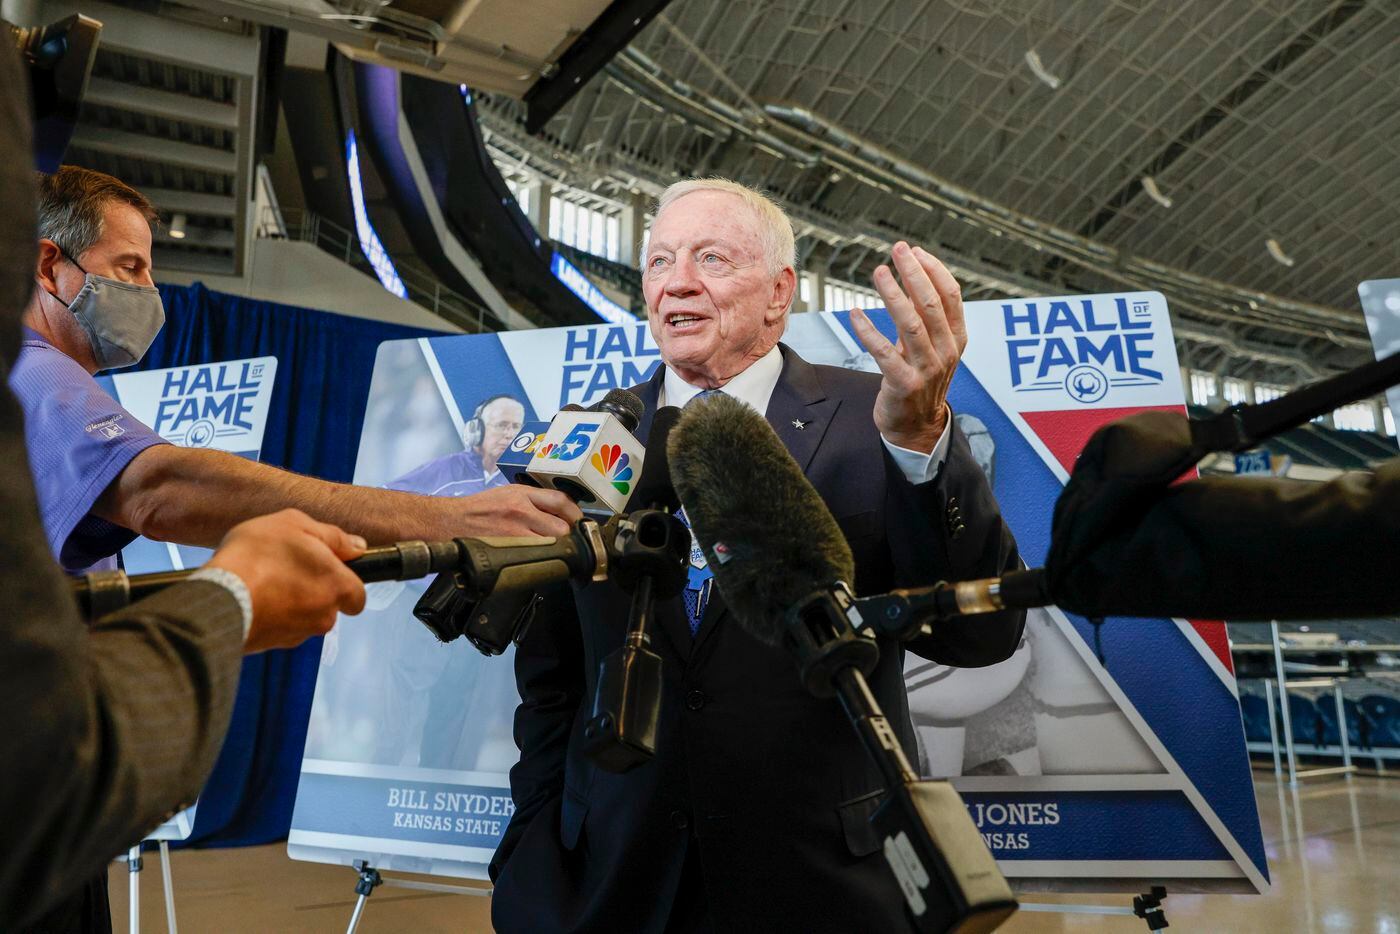 Dallas Cowboys owner Jerry Jones speaks with the media after the Cotton Bowl Hall of Fame induction ceremony at AT&T Stadium on Tuesday, Oct. 5, 2021, in Arlington. (Elias Valverde II/The Dallas Morning News)